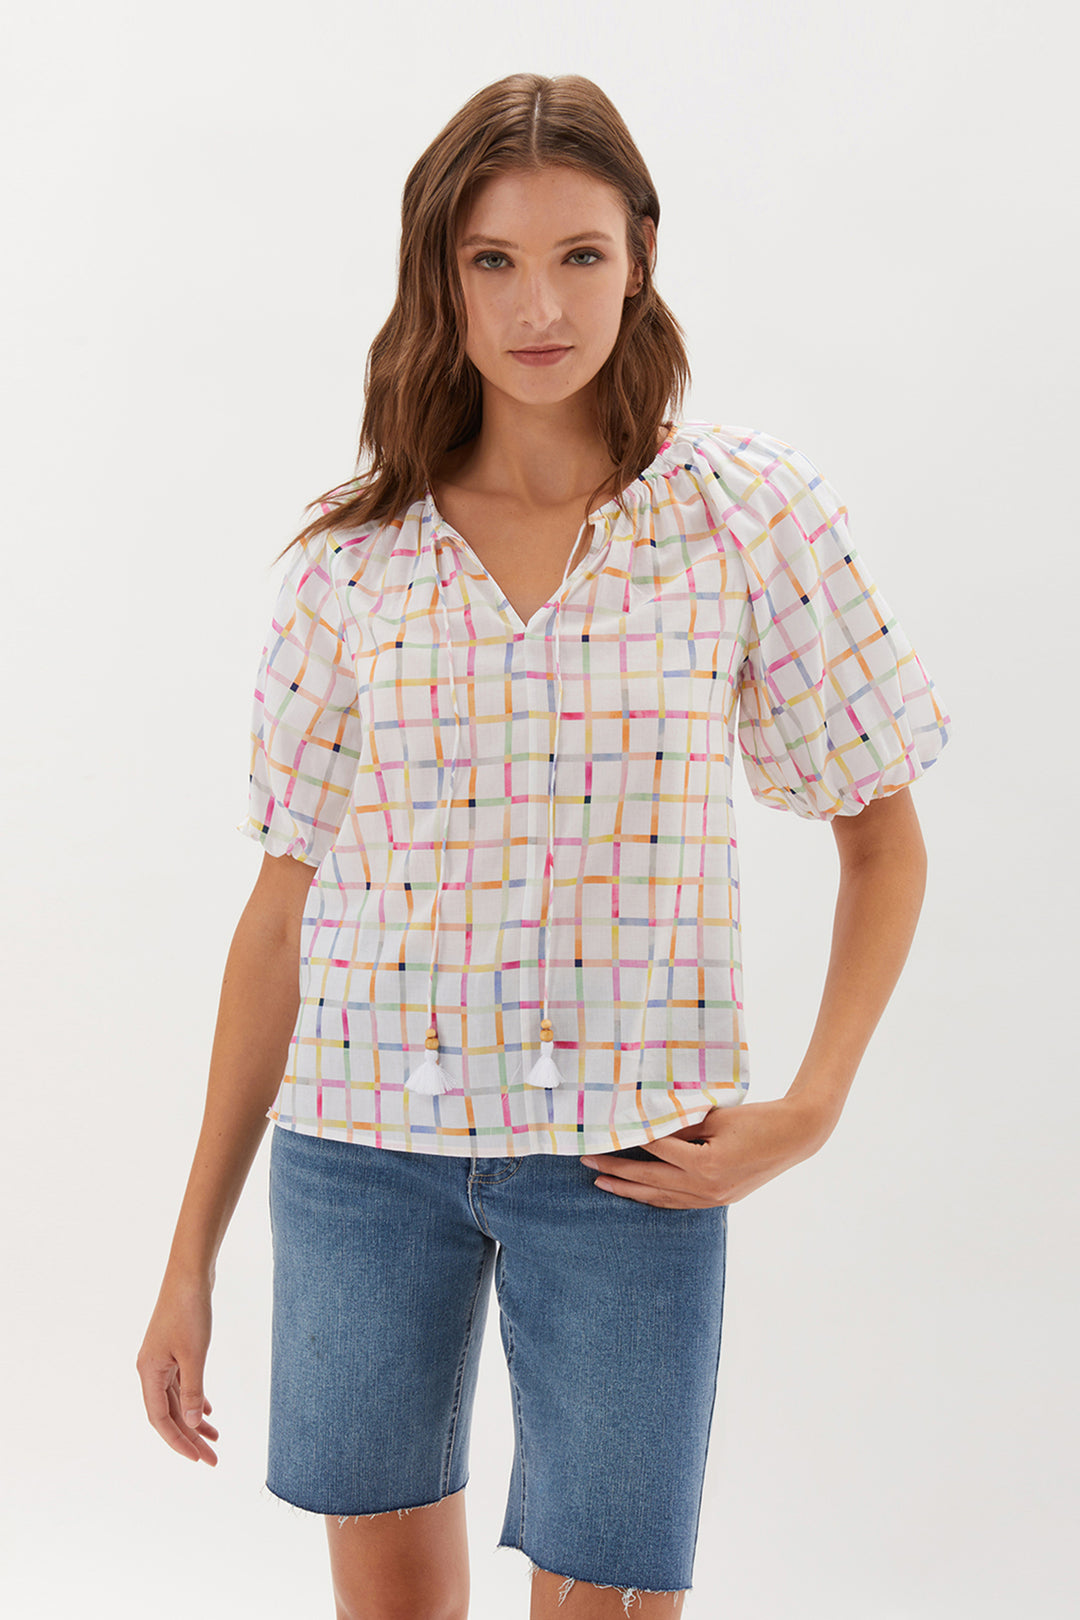 Winslet Puff Sleeve Top With Tie - Picnic